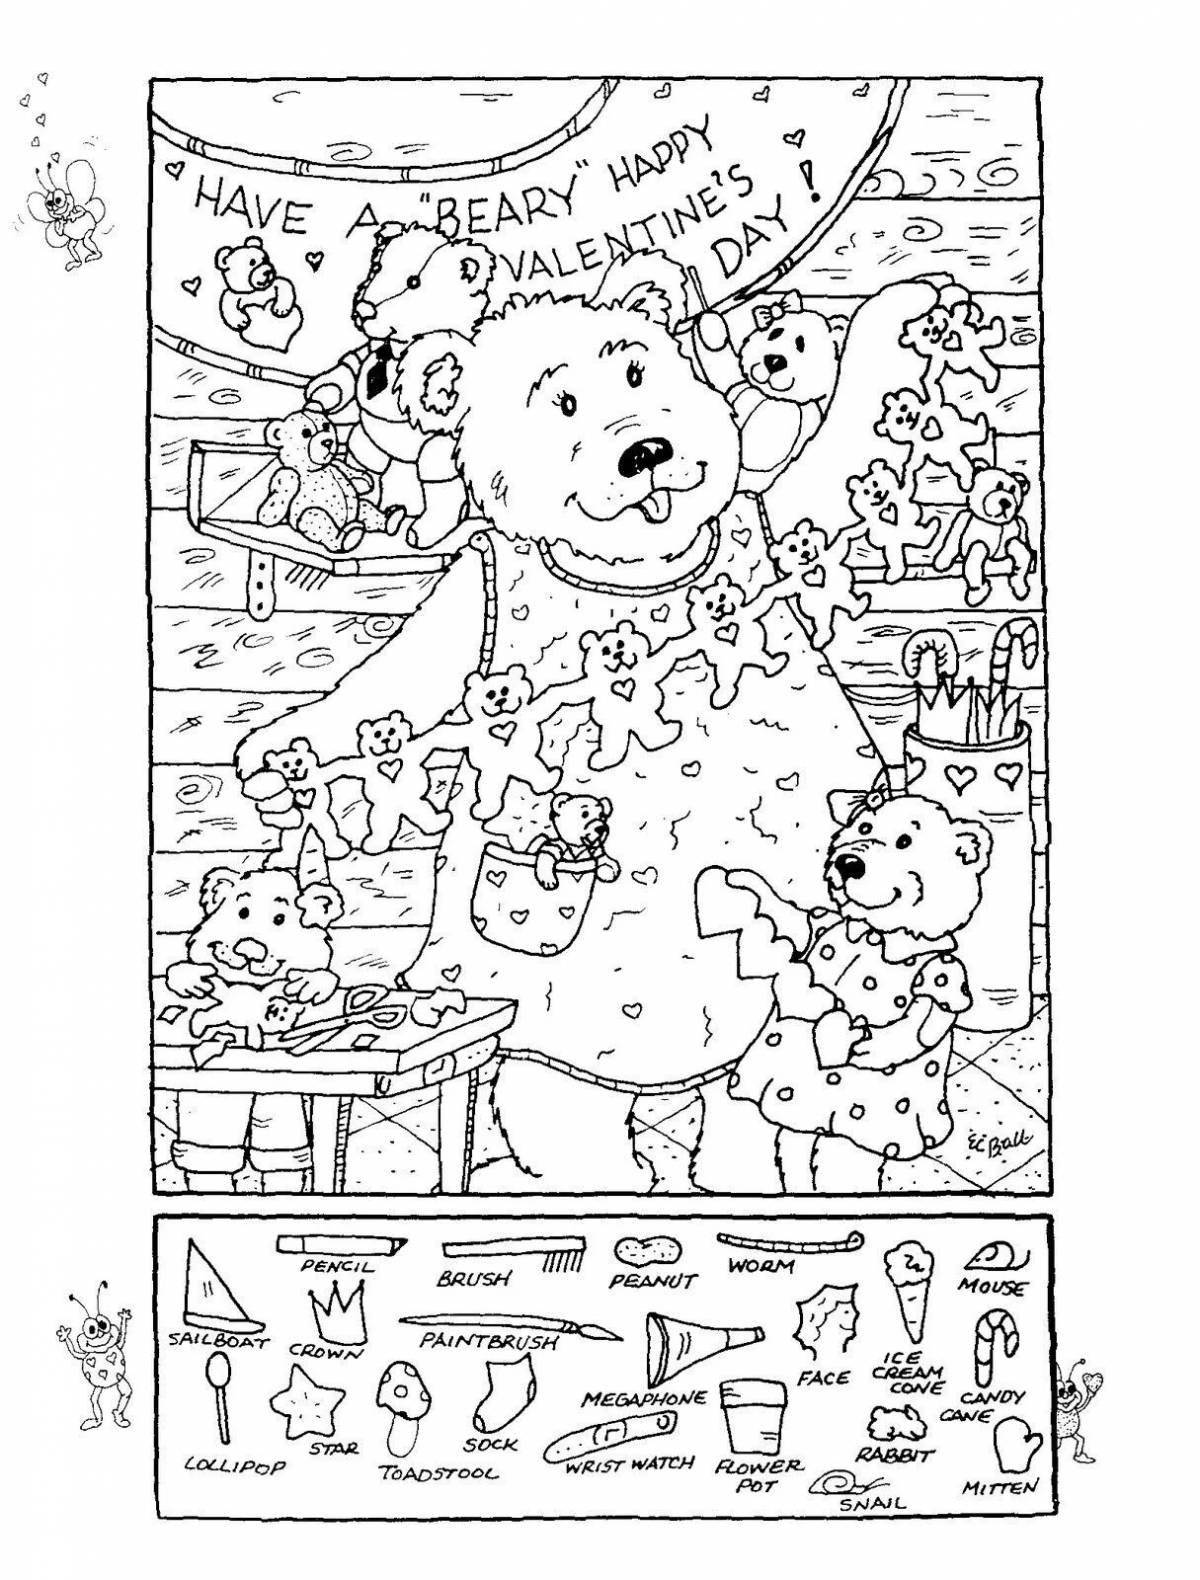 Find the object creative coloring page